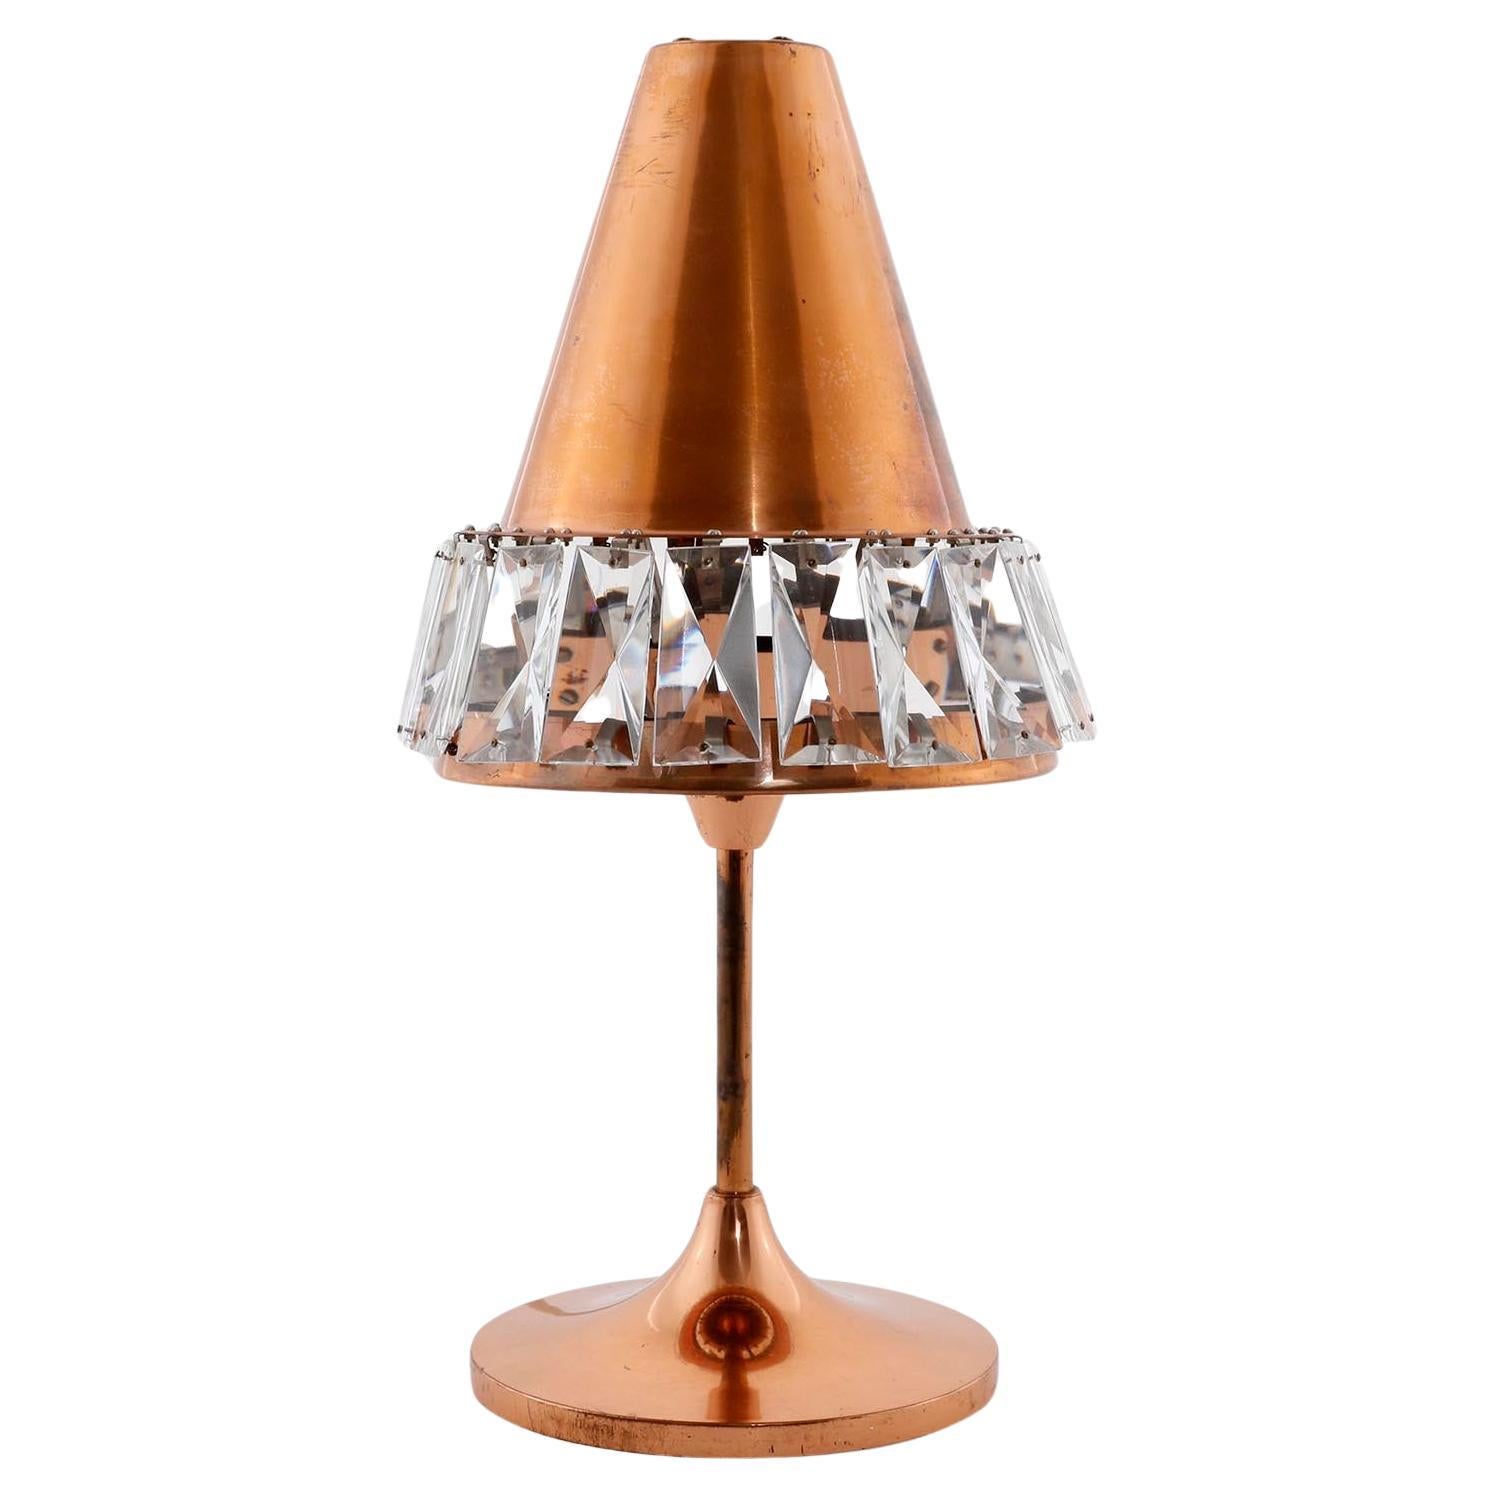 Bakalowits Table Lamp, Patinated Copper Nickel Crystal Glass, Austria, 1960s